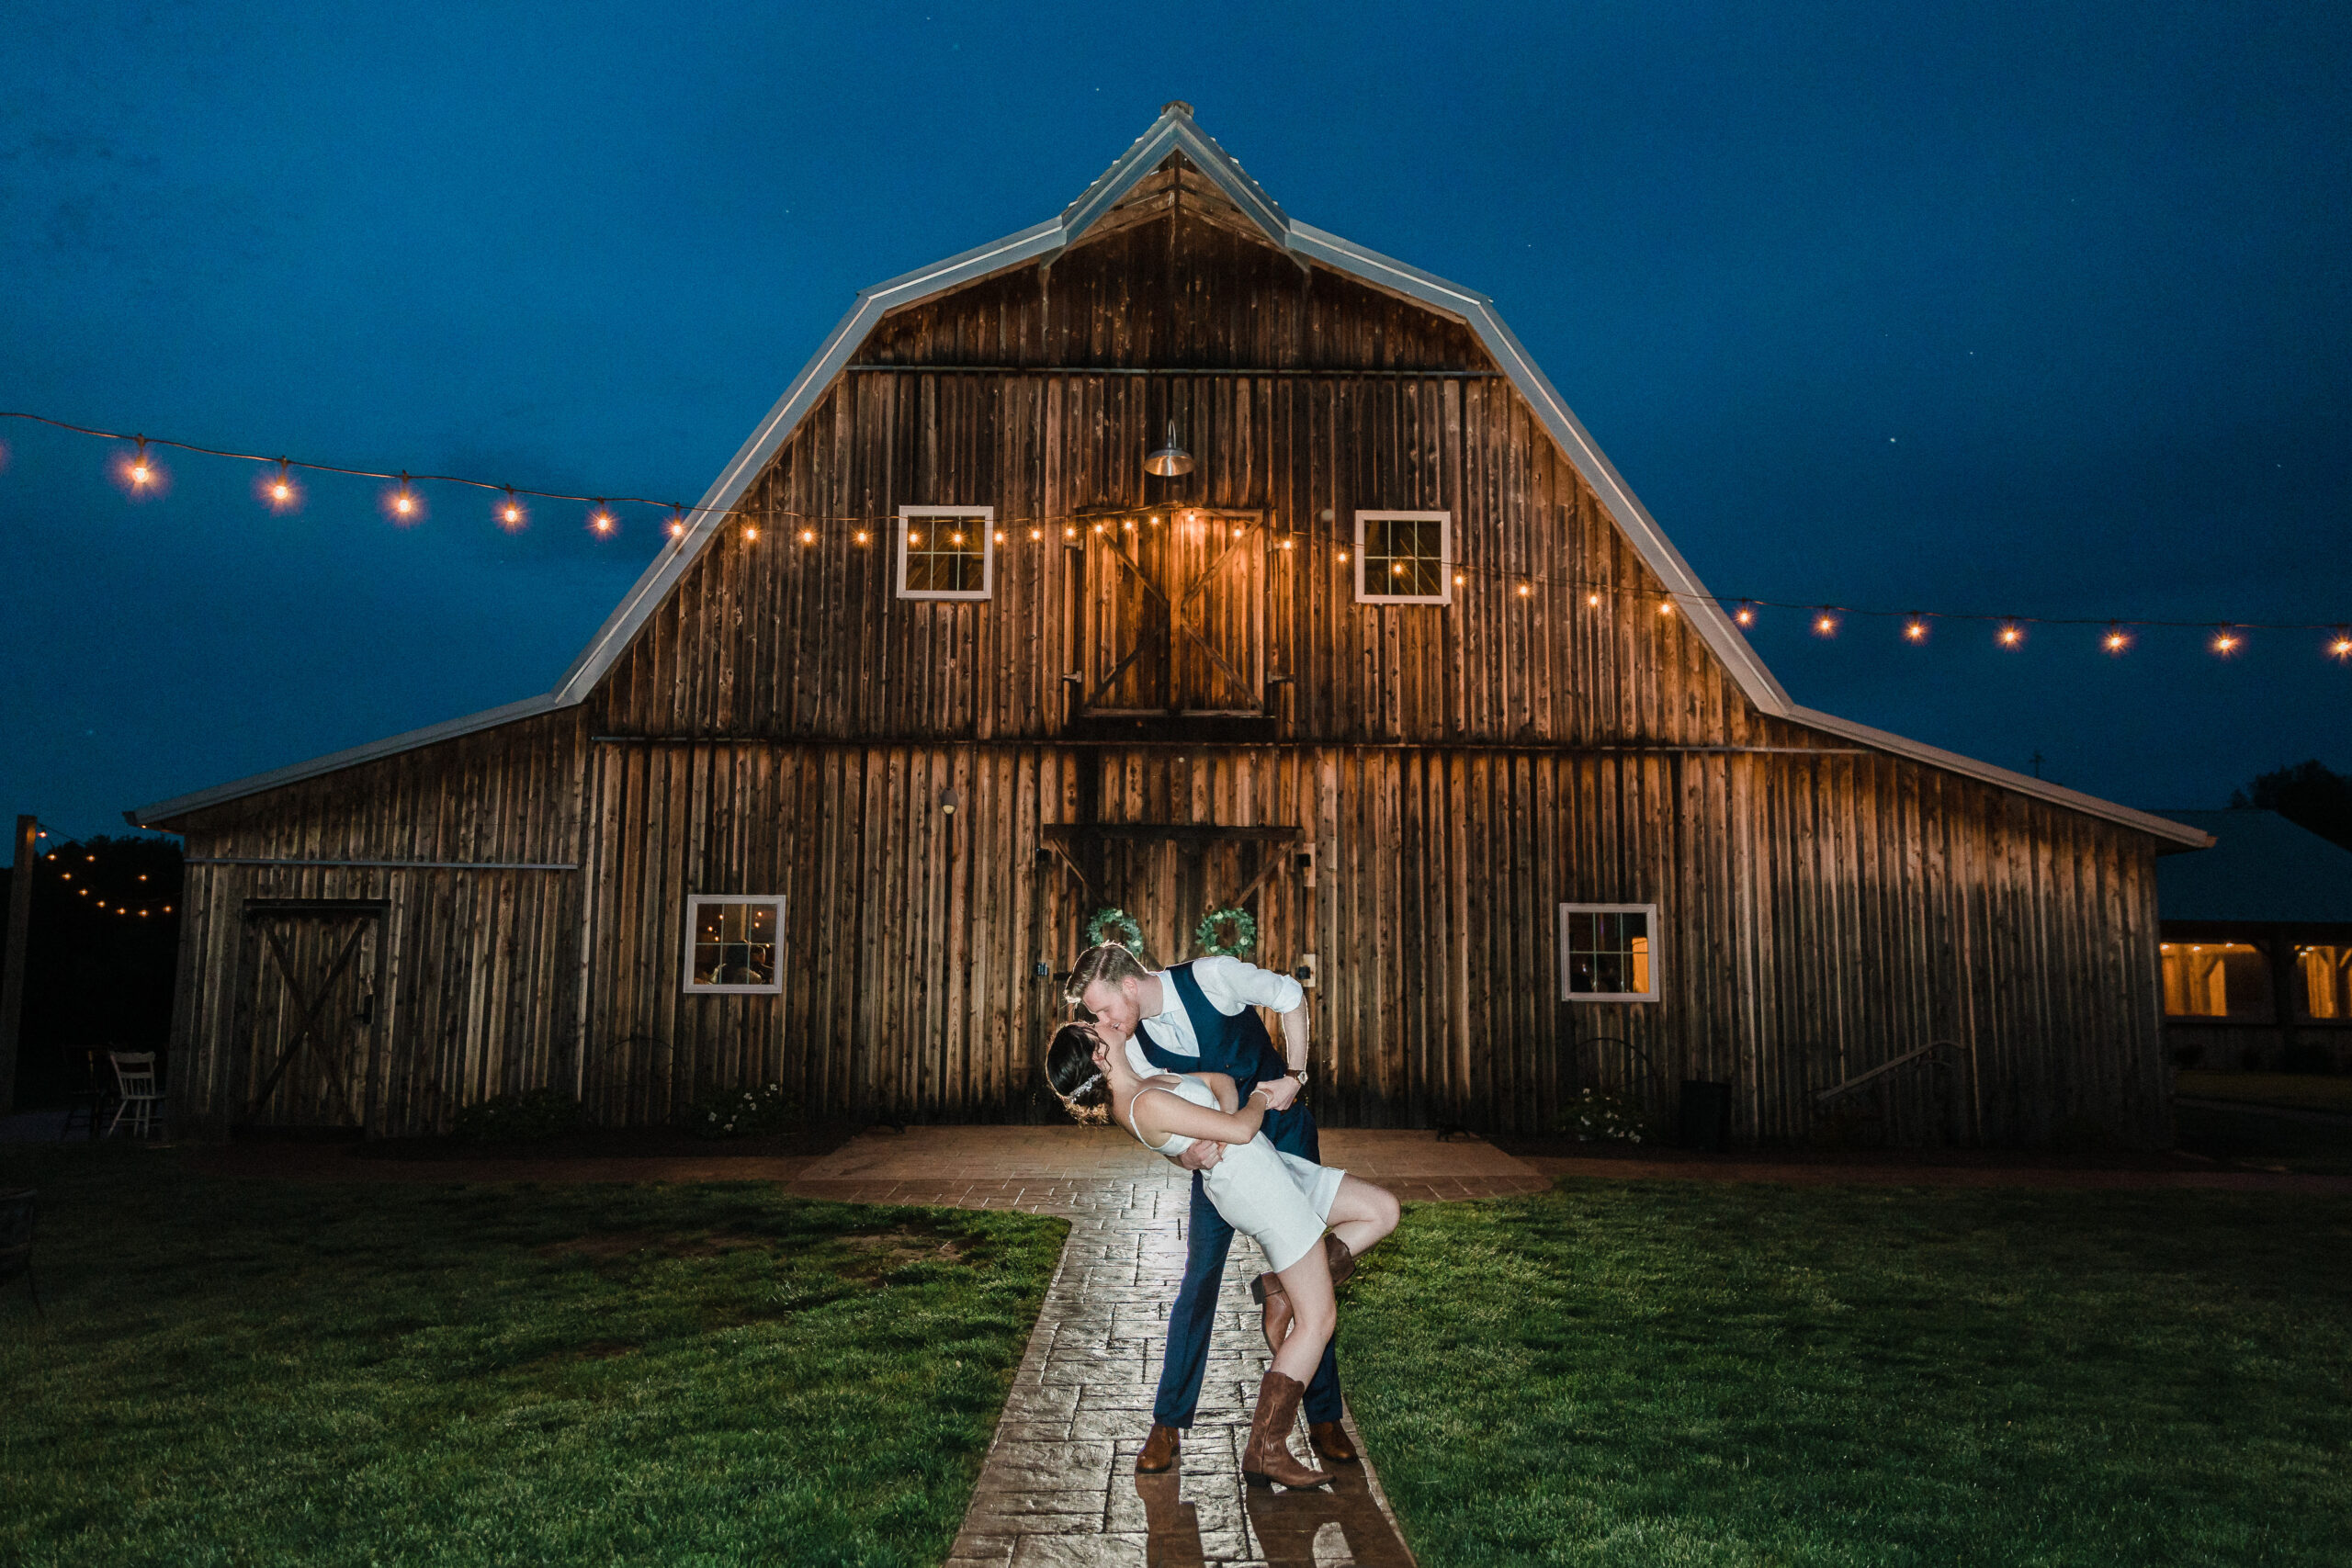 A couple dips and kisses in front of a rustic barn wedding venue with string lights overhead.